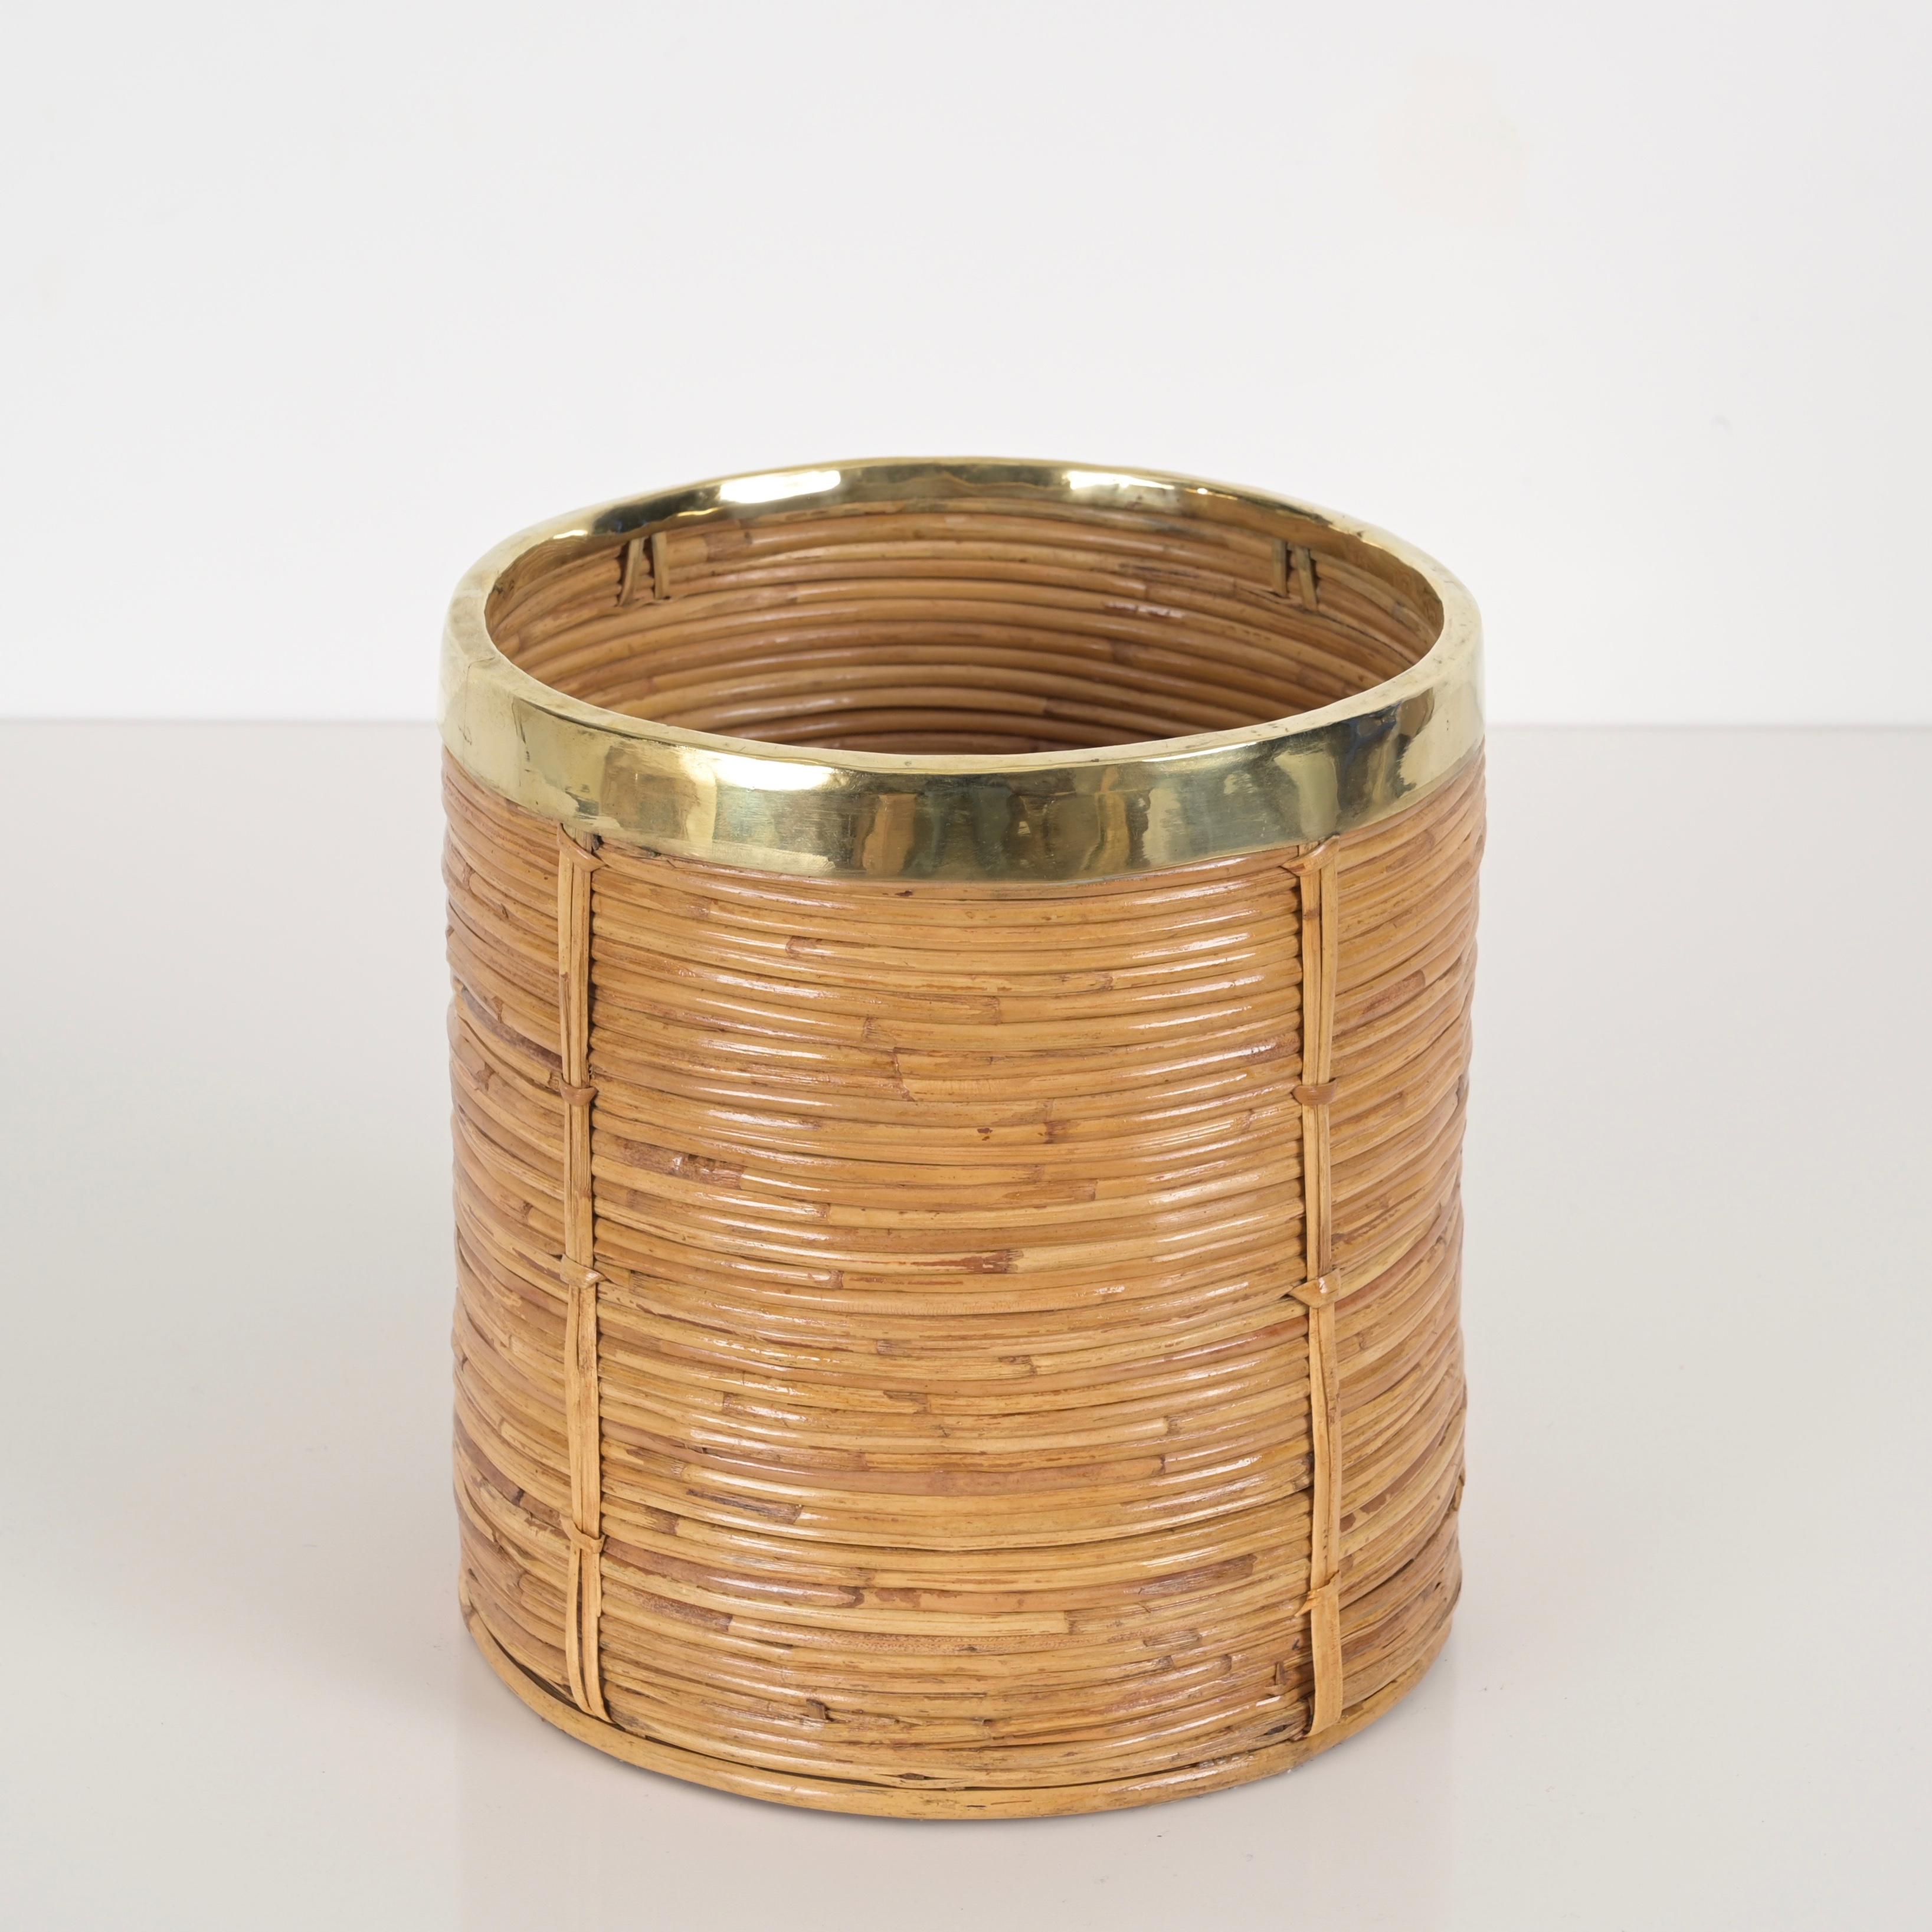 20th Century Midcentury Rattan and Brass Planter or Decorative Basket, Italy 1970s For Sale